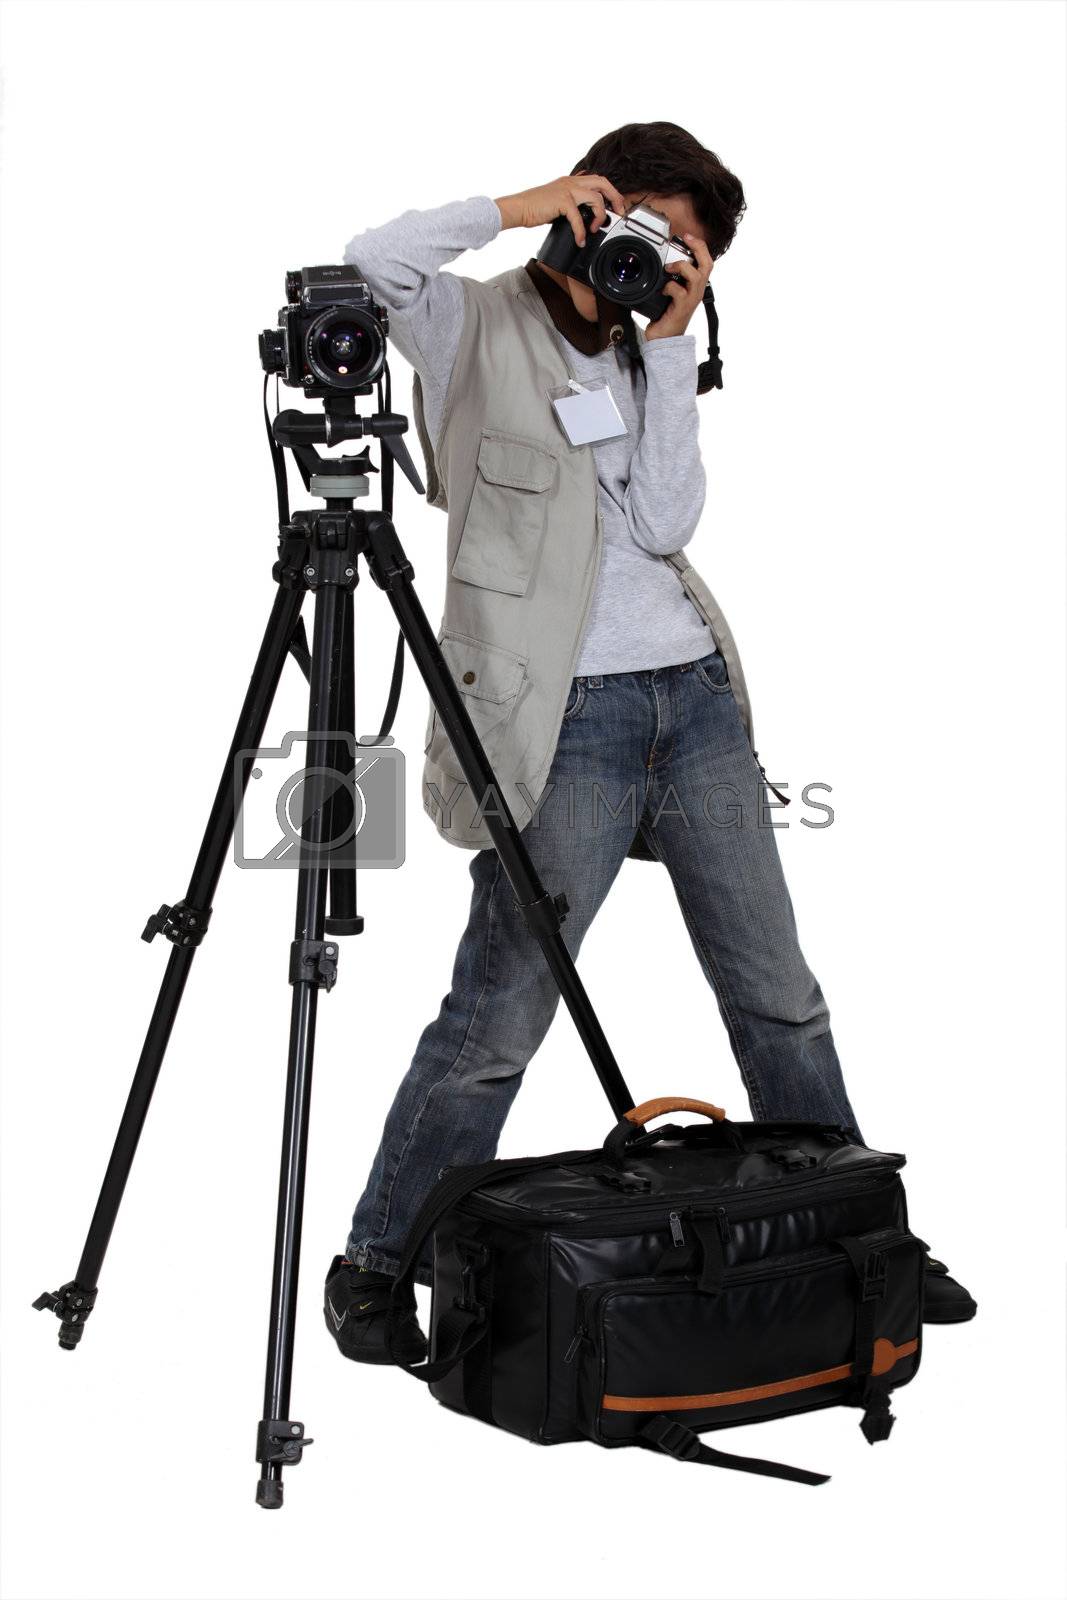 Royalty free image of Professional photographer by phovoir